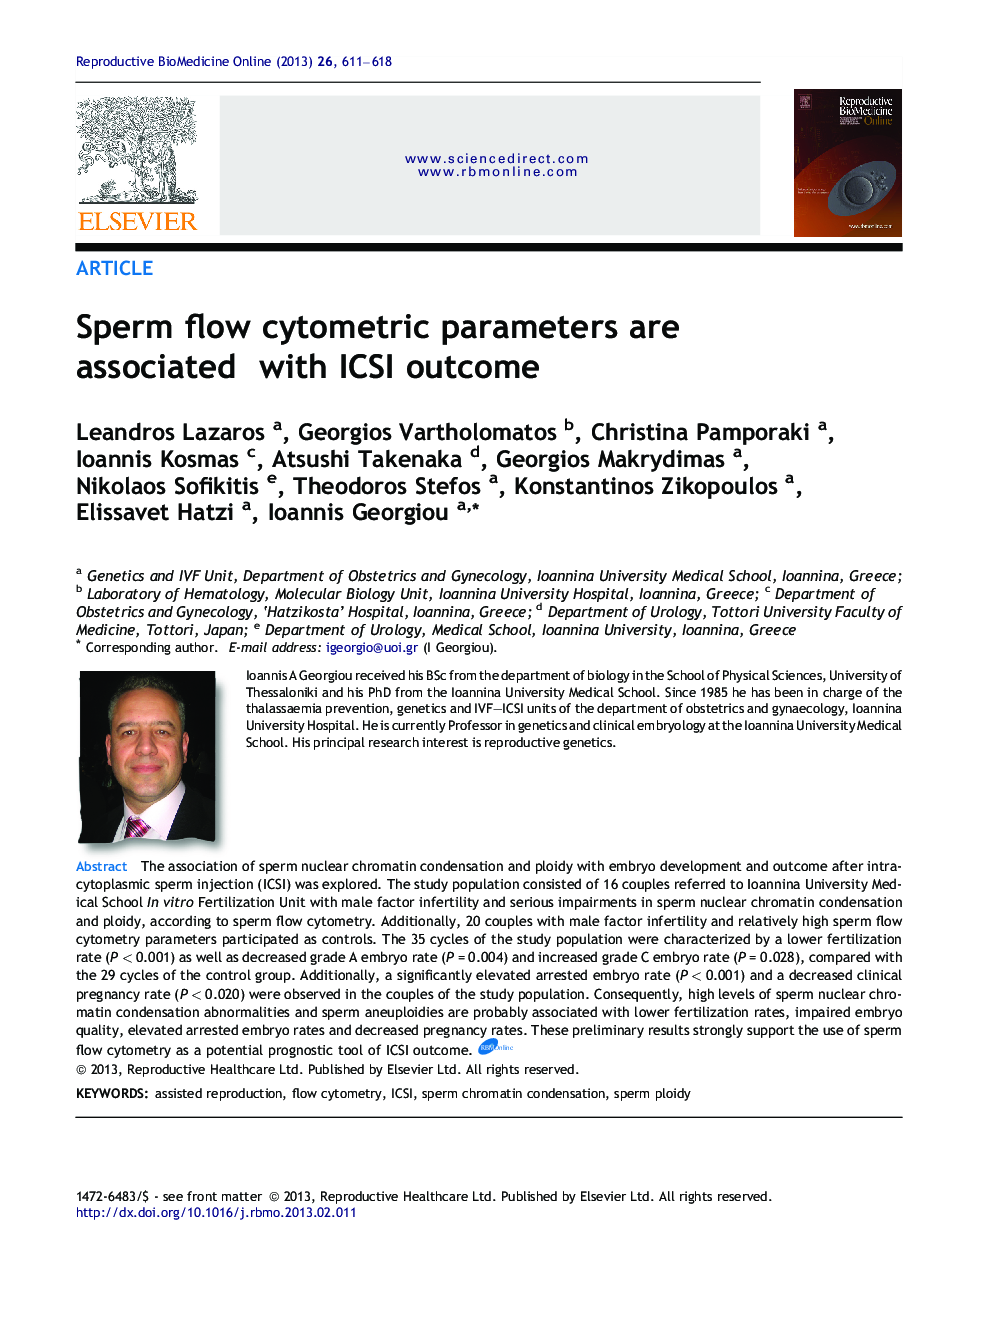 Sperm flow cytometric parameters are associated with ICSI outcome